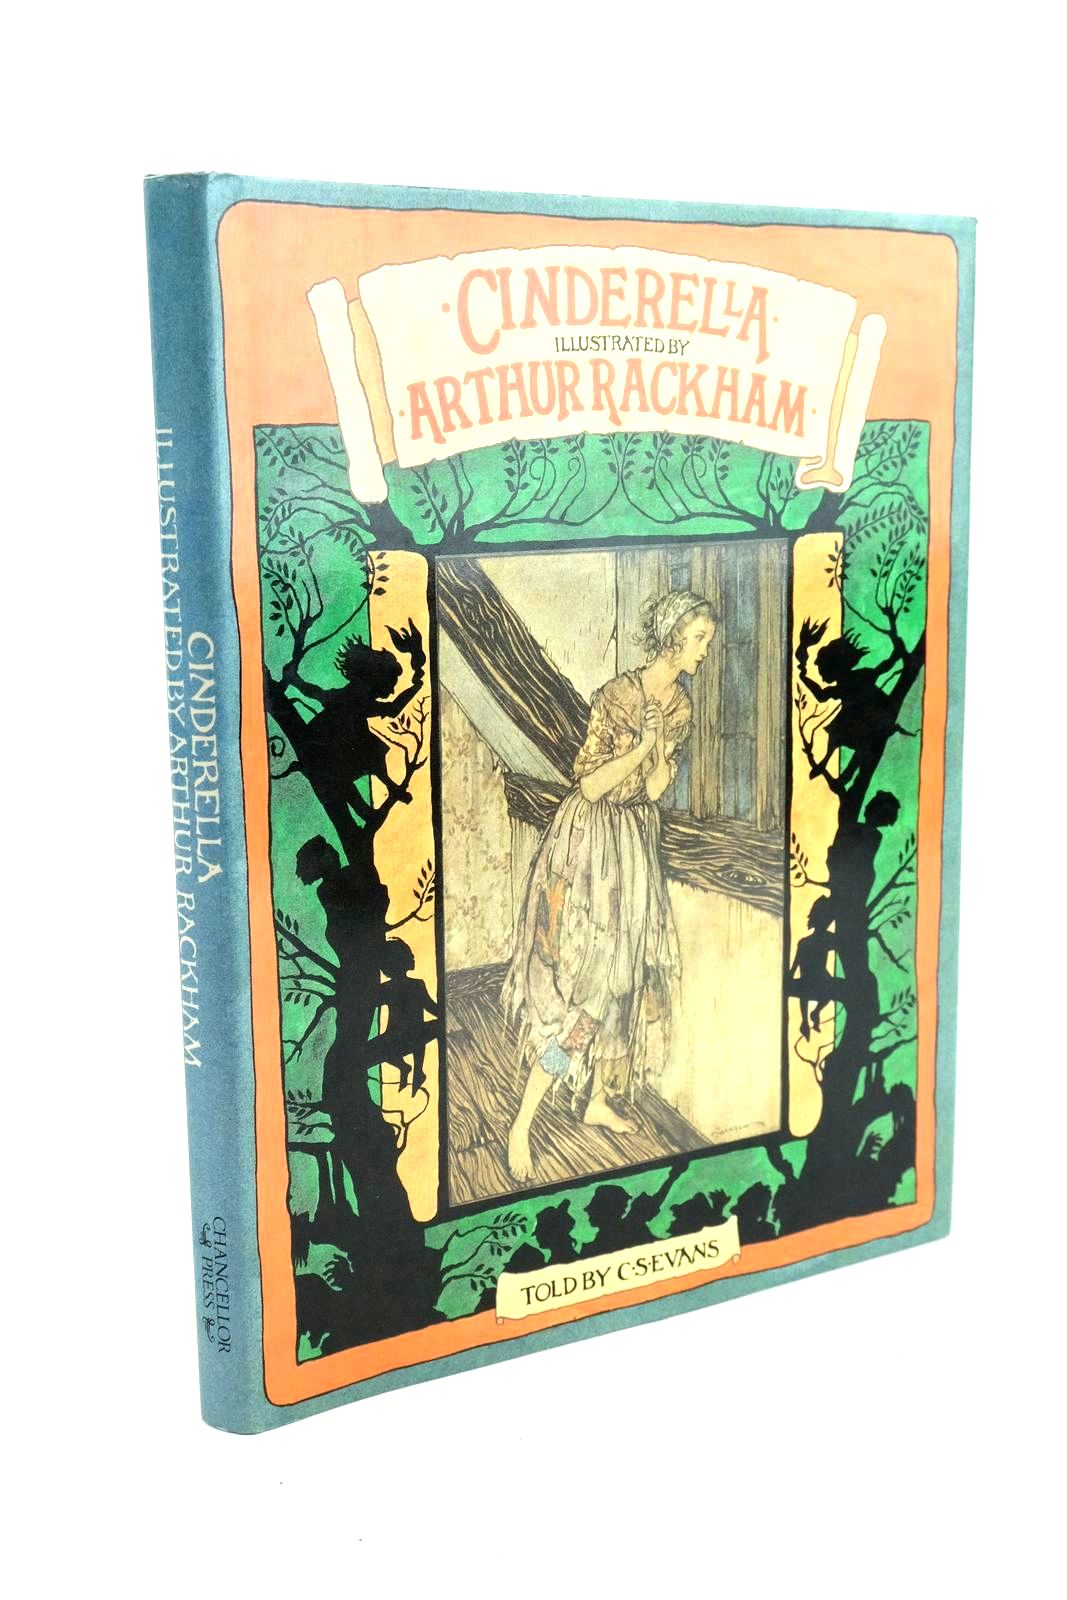 Photo of CINDERELLA written by Evans, C.S. illustrated by Rackham, Arthur published by Chancellor Press (STOCK CODE: 1323393)  for sale by Stella & Rose's Books